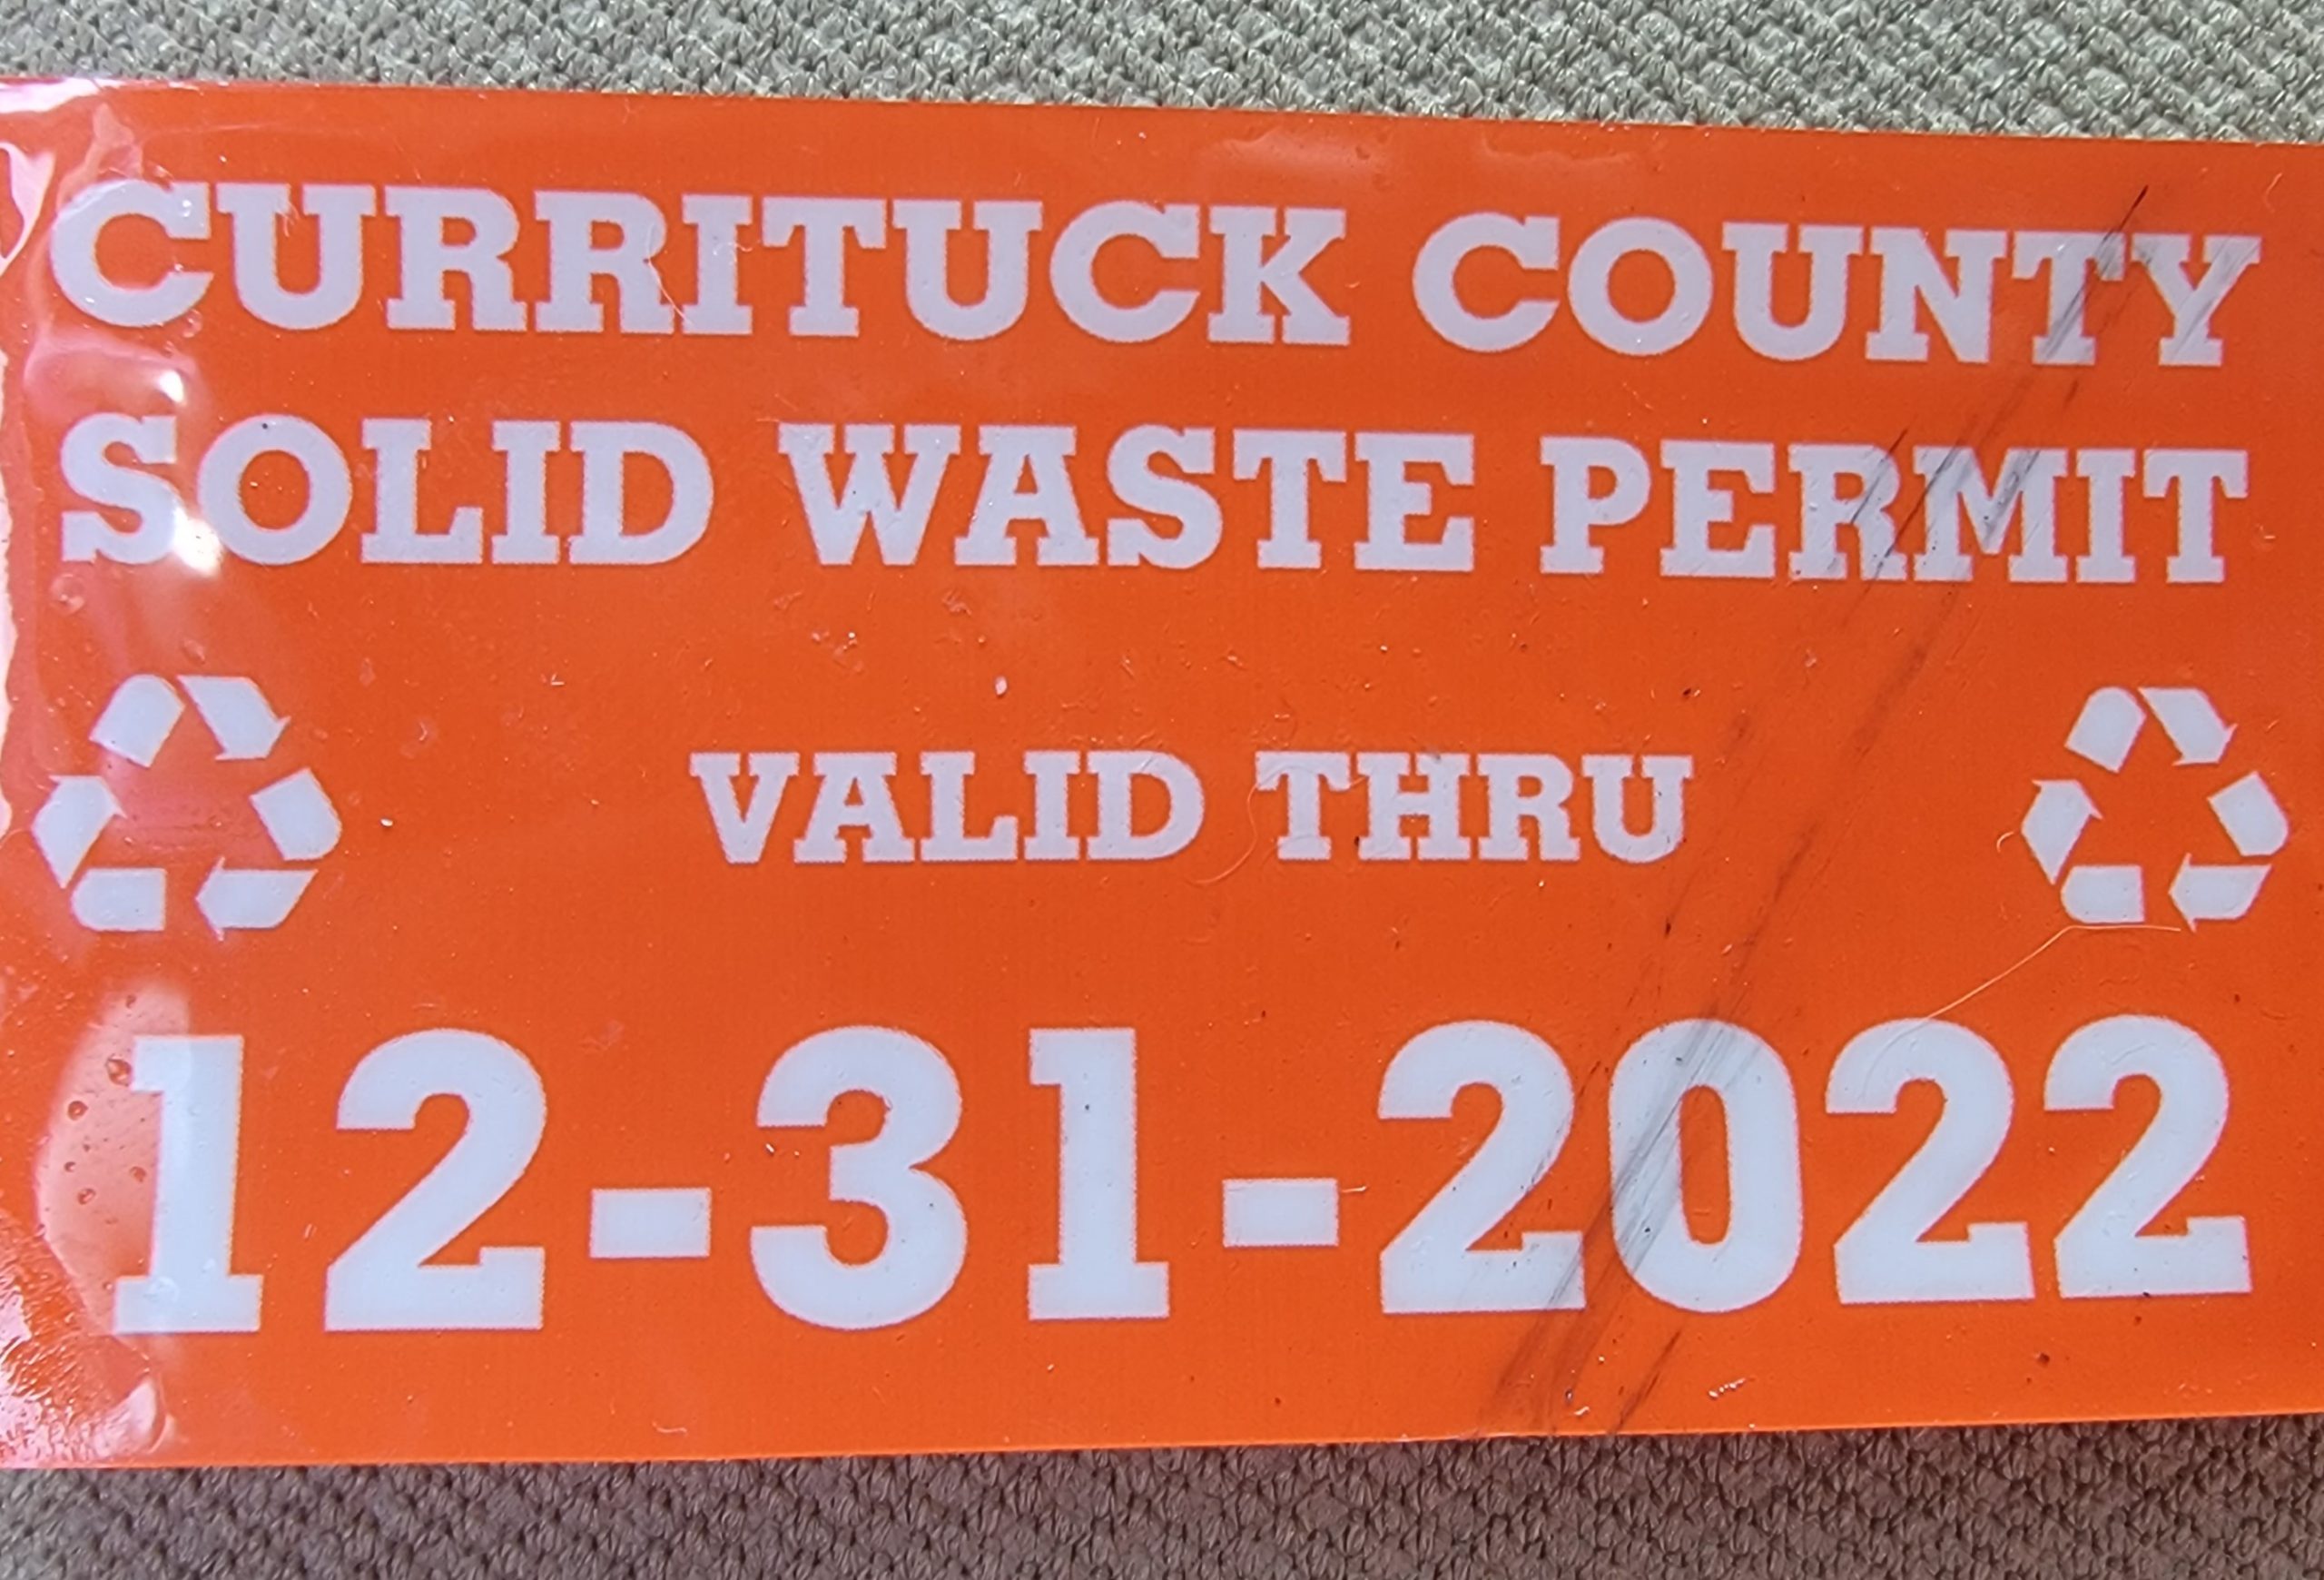 Currituck County residents and property owners to get new access permit in December